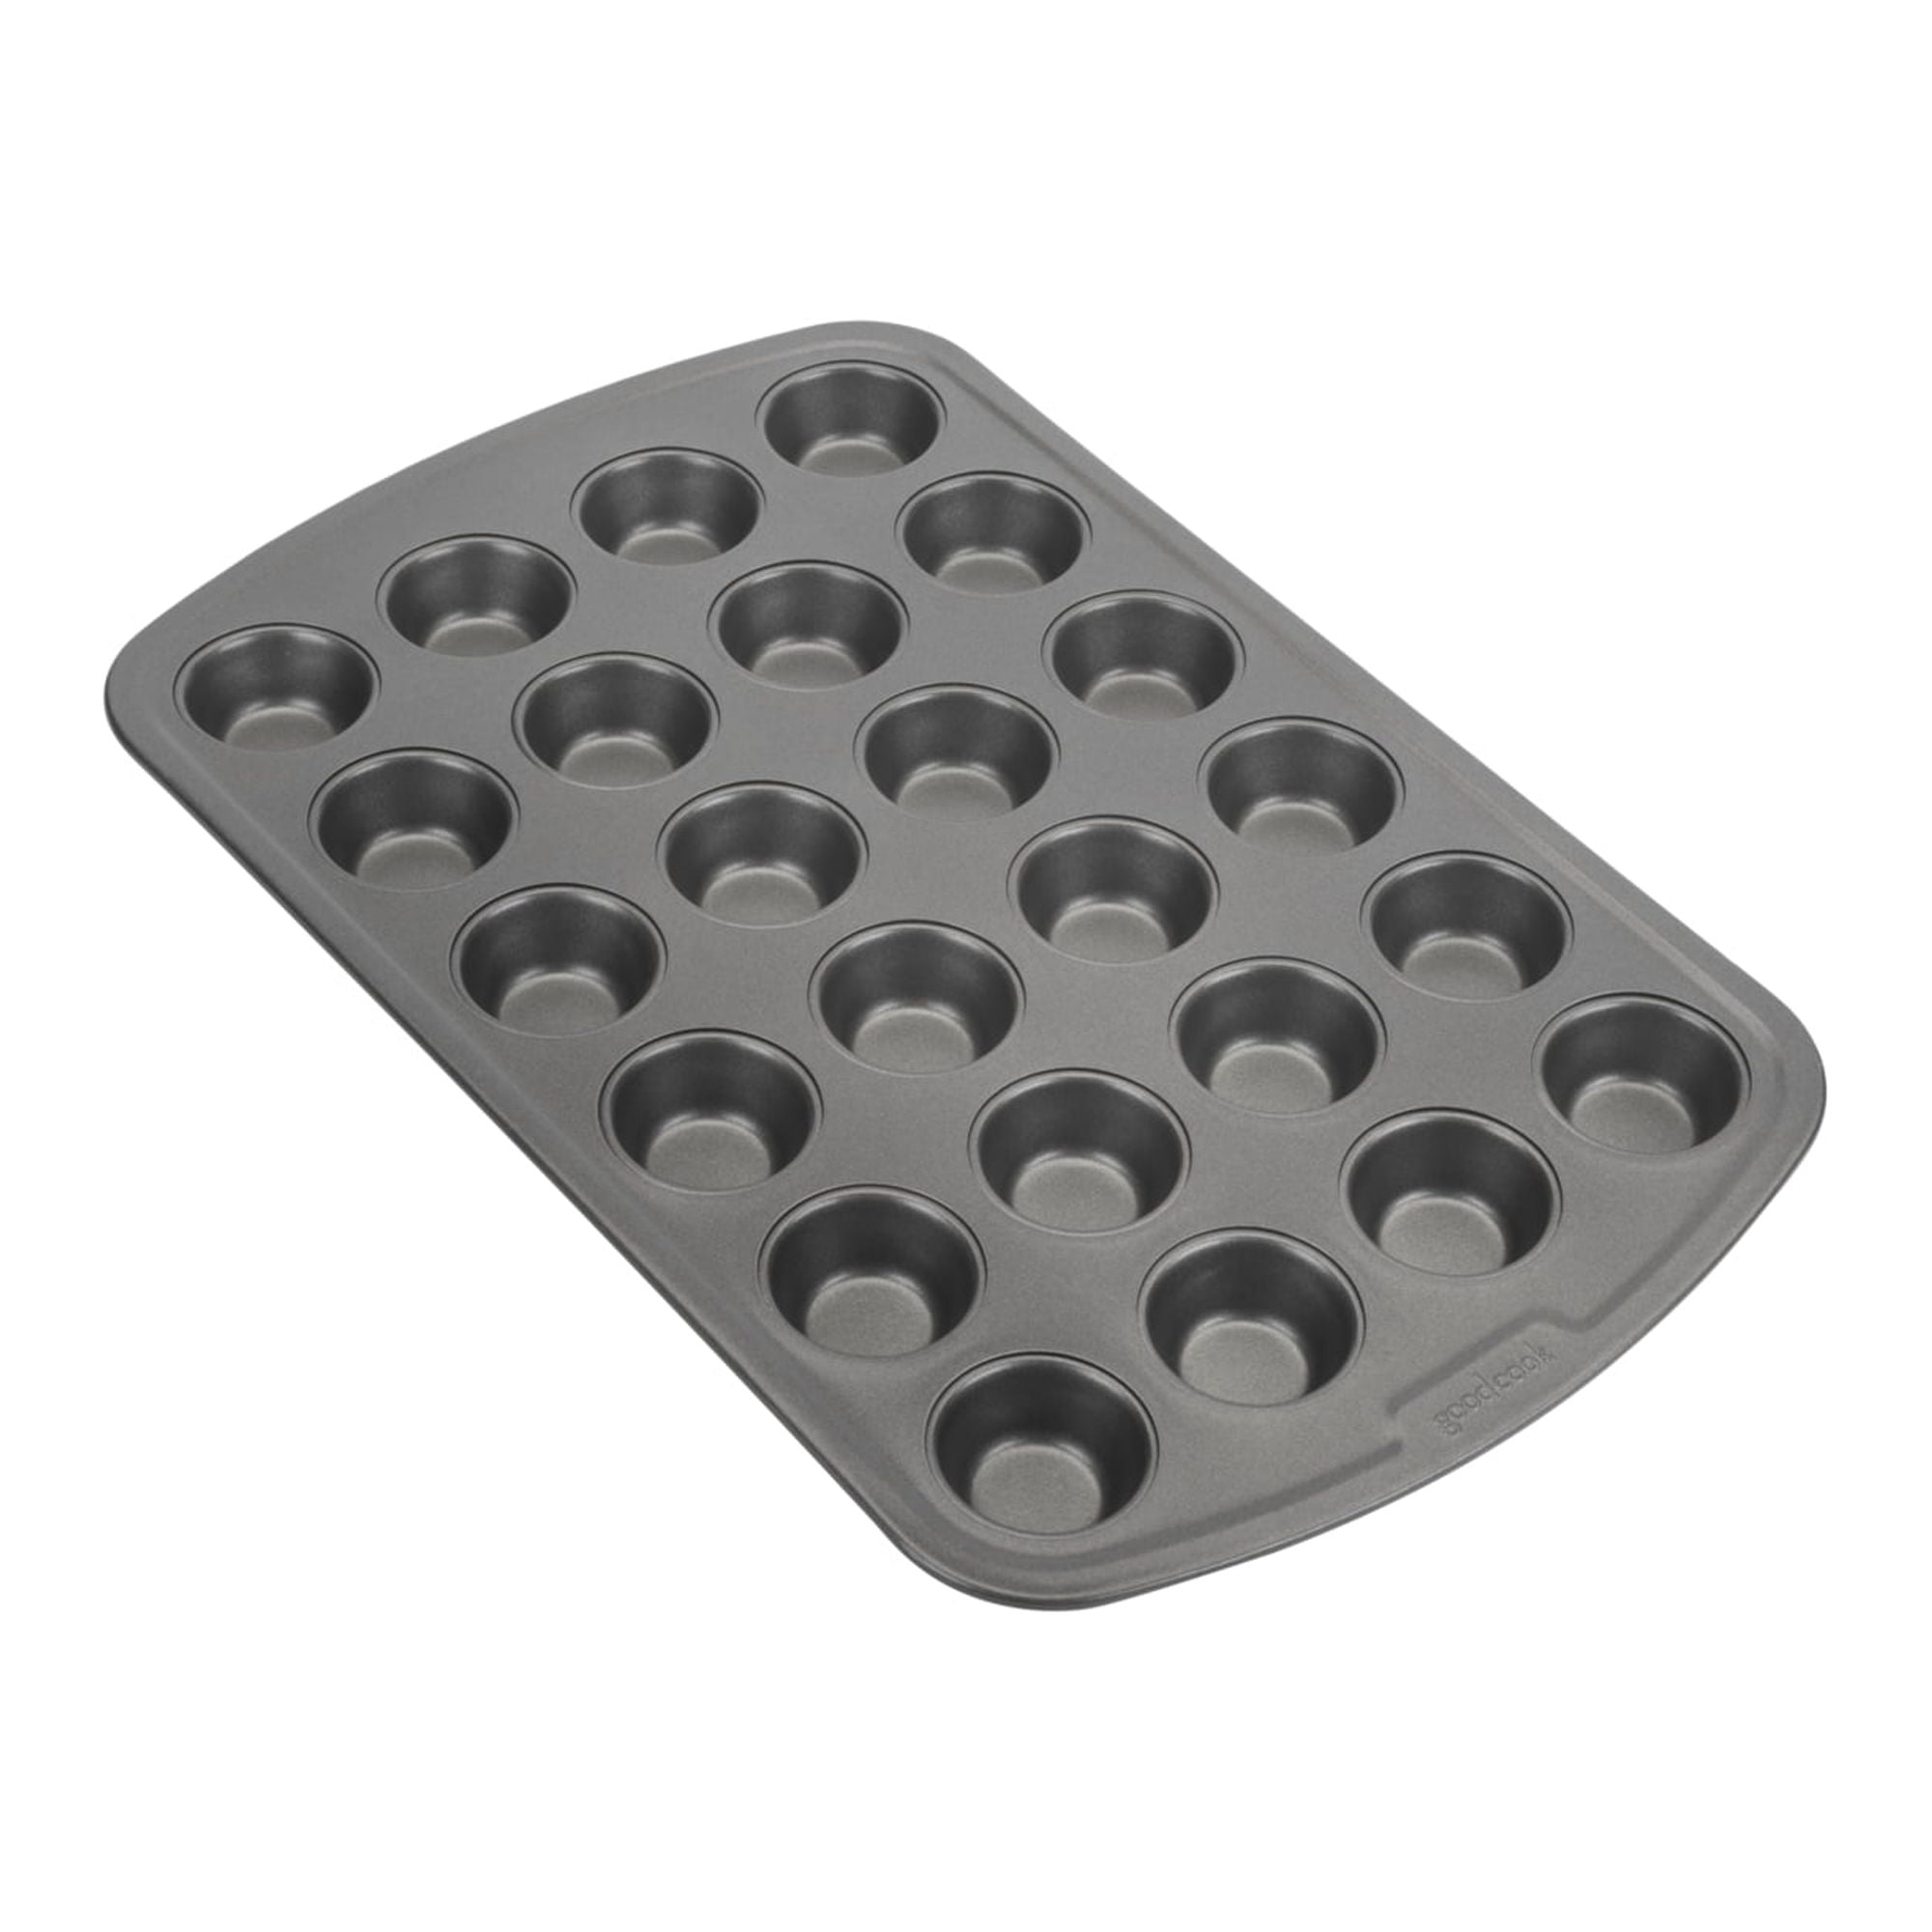 GoodCook 48-Cup Nonstick Steel Mini Cupcake and Muffin Pan, Gray